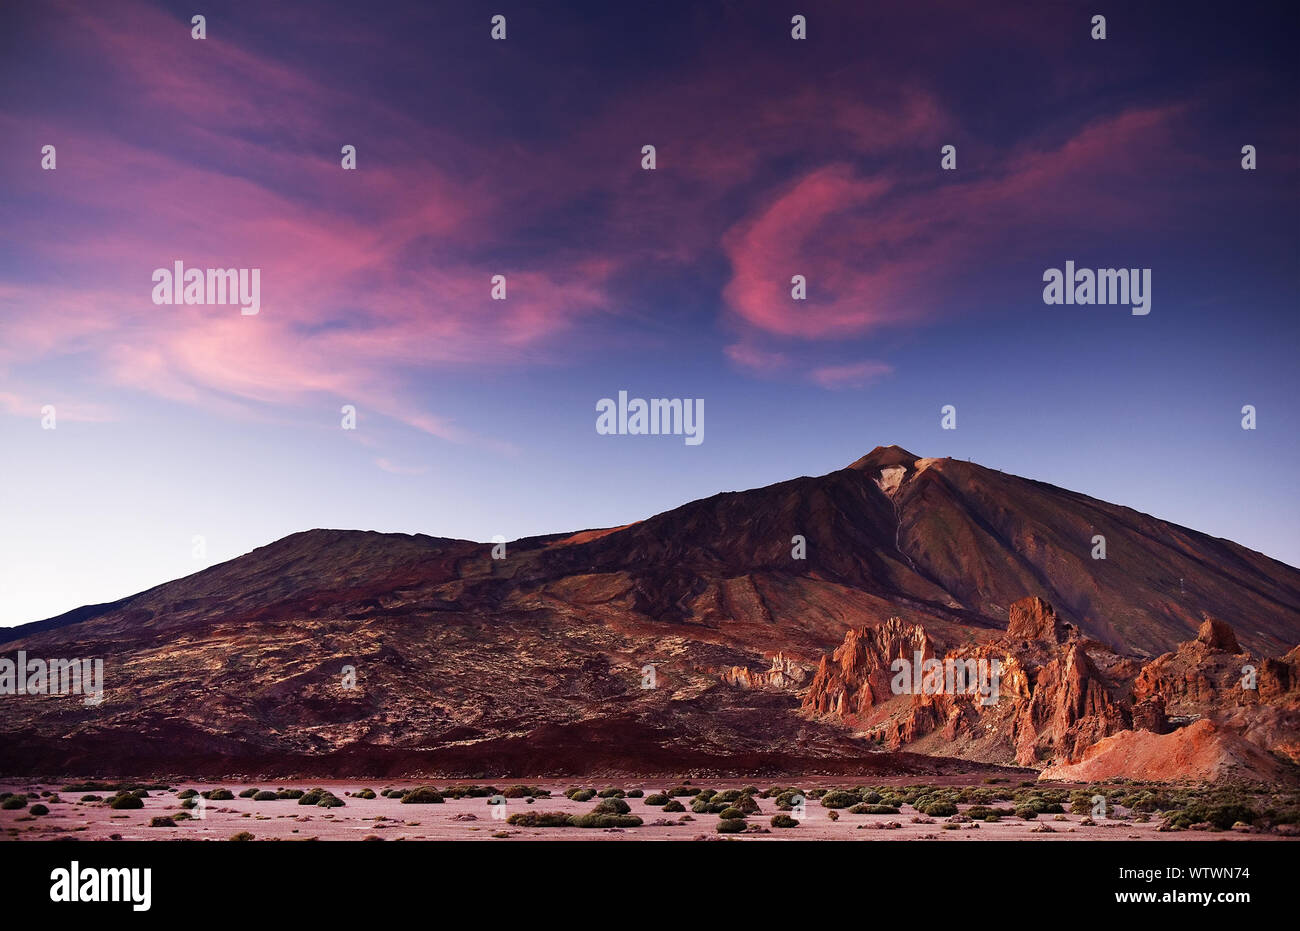 Scenic View Of El Teide Volcano At Sunset Stock Photo